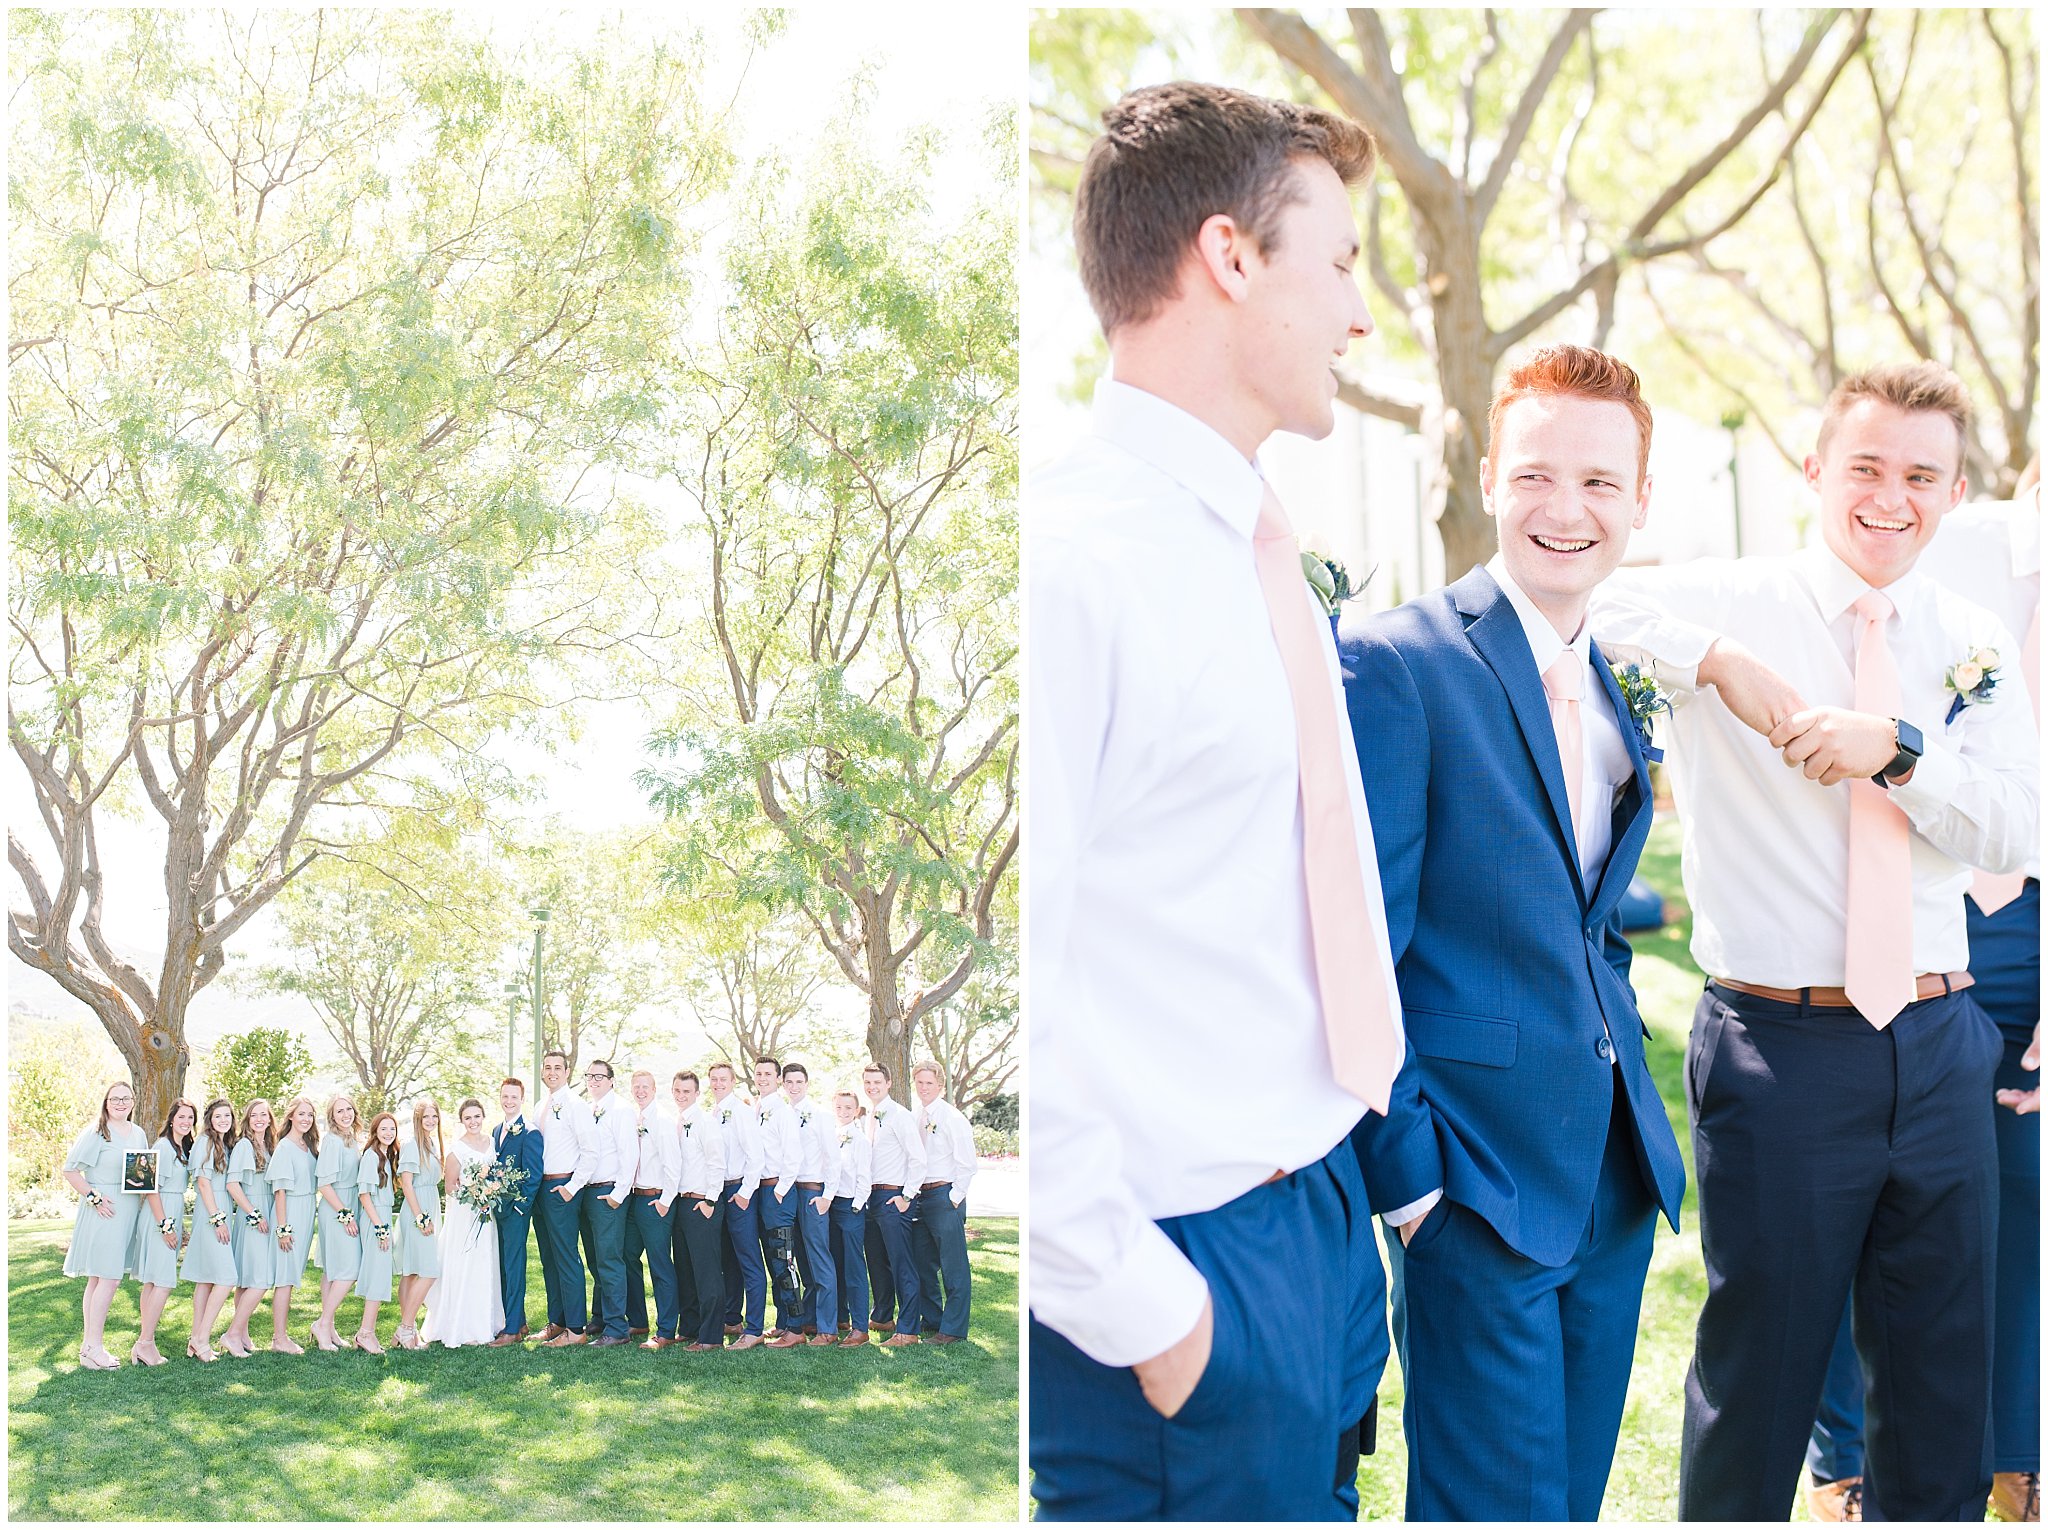 Bride and Groom with bridal party | Bountiful Temple Wedding and Oak Hills Reception | Jessie and Dallin Photography